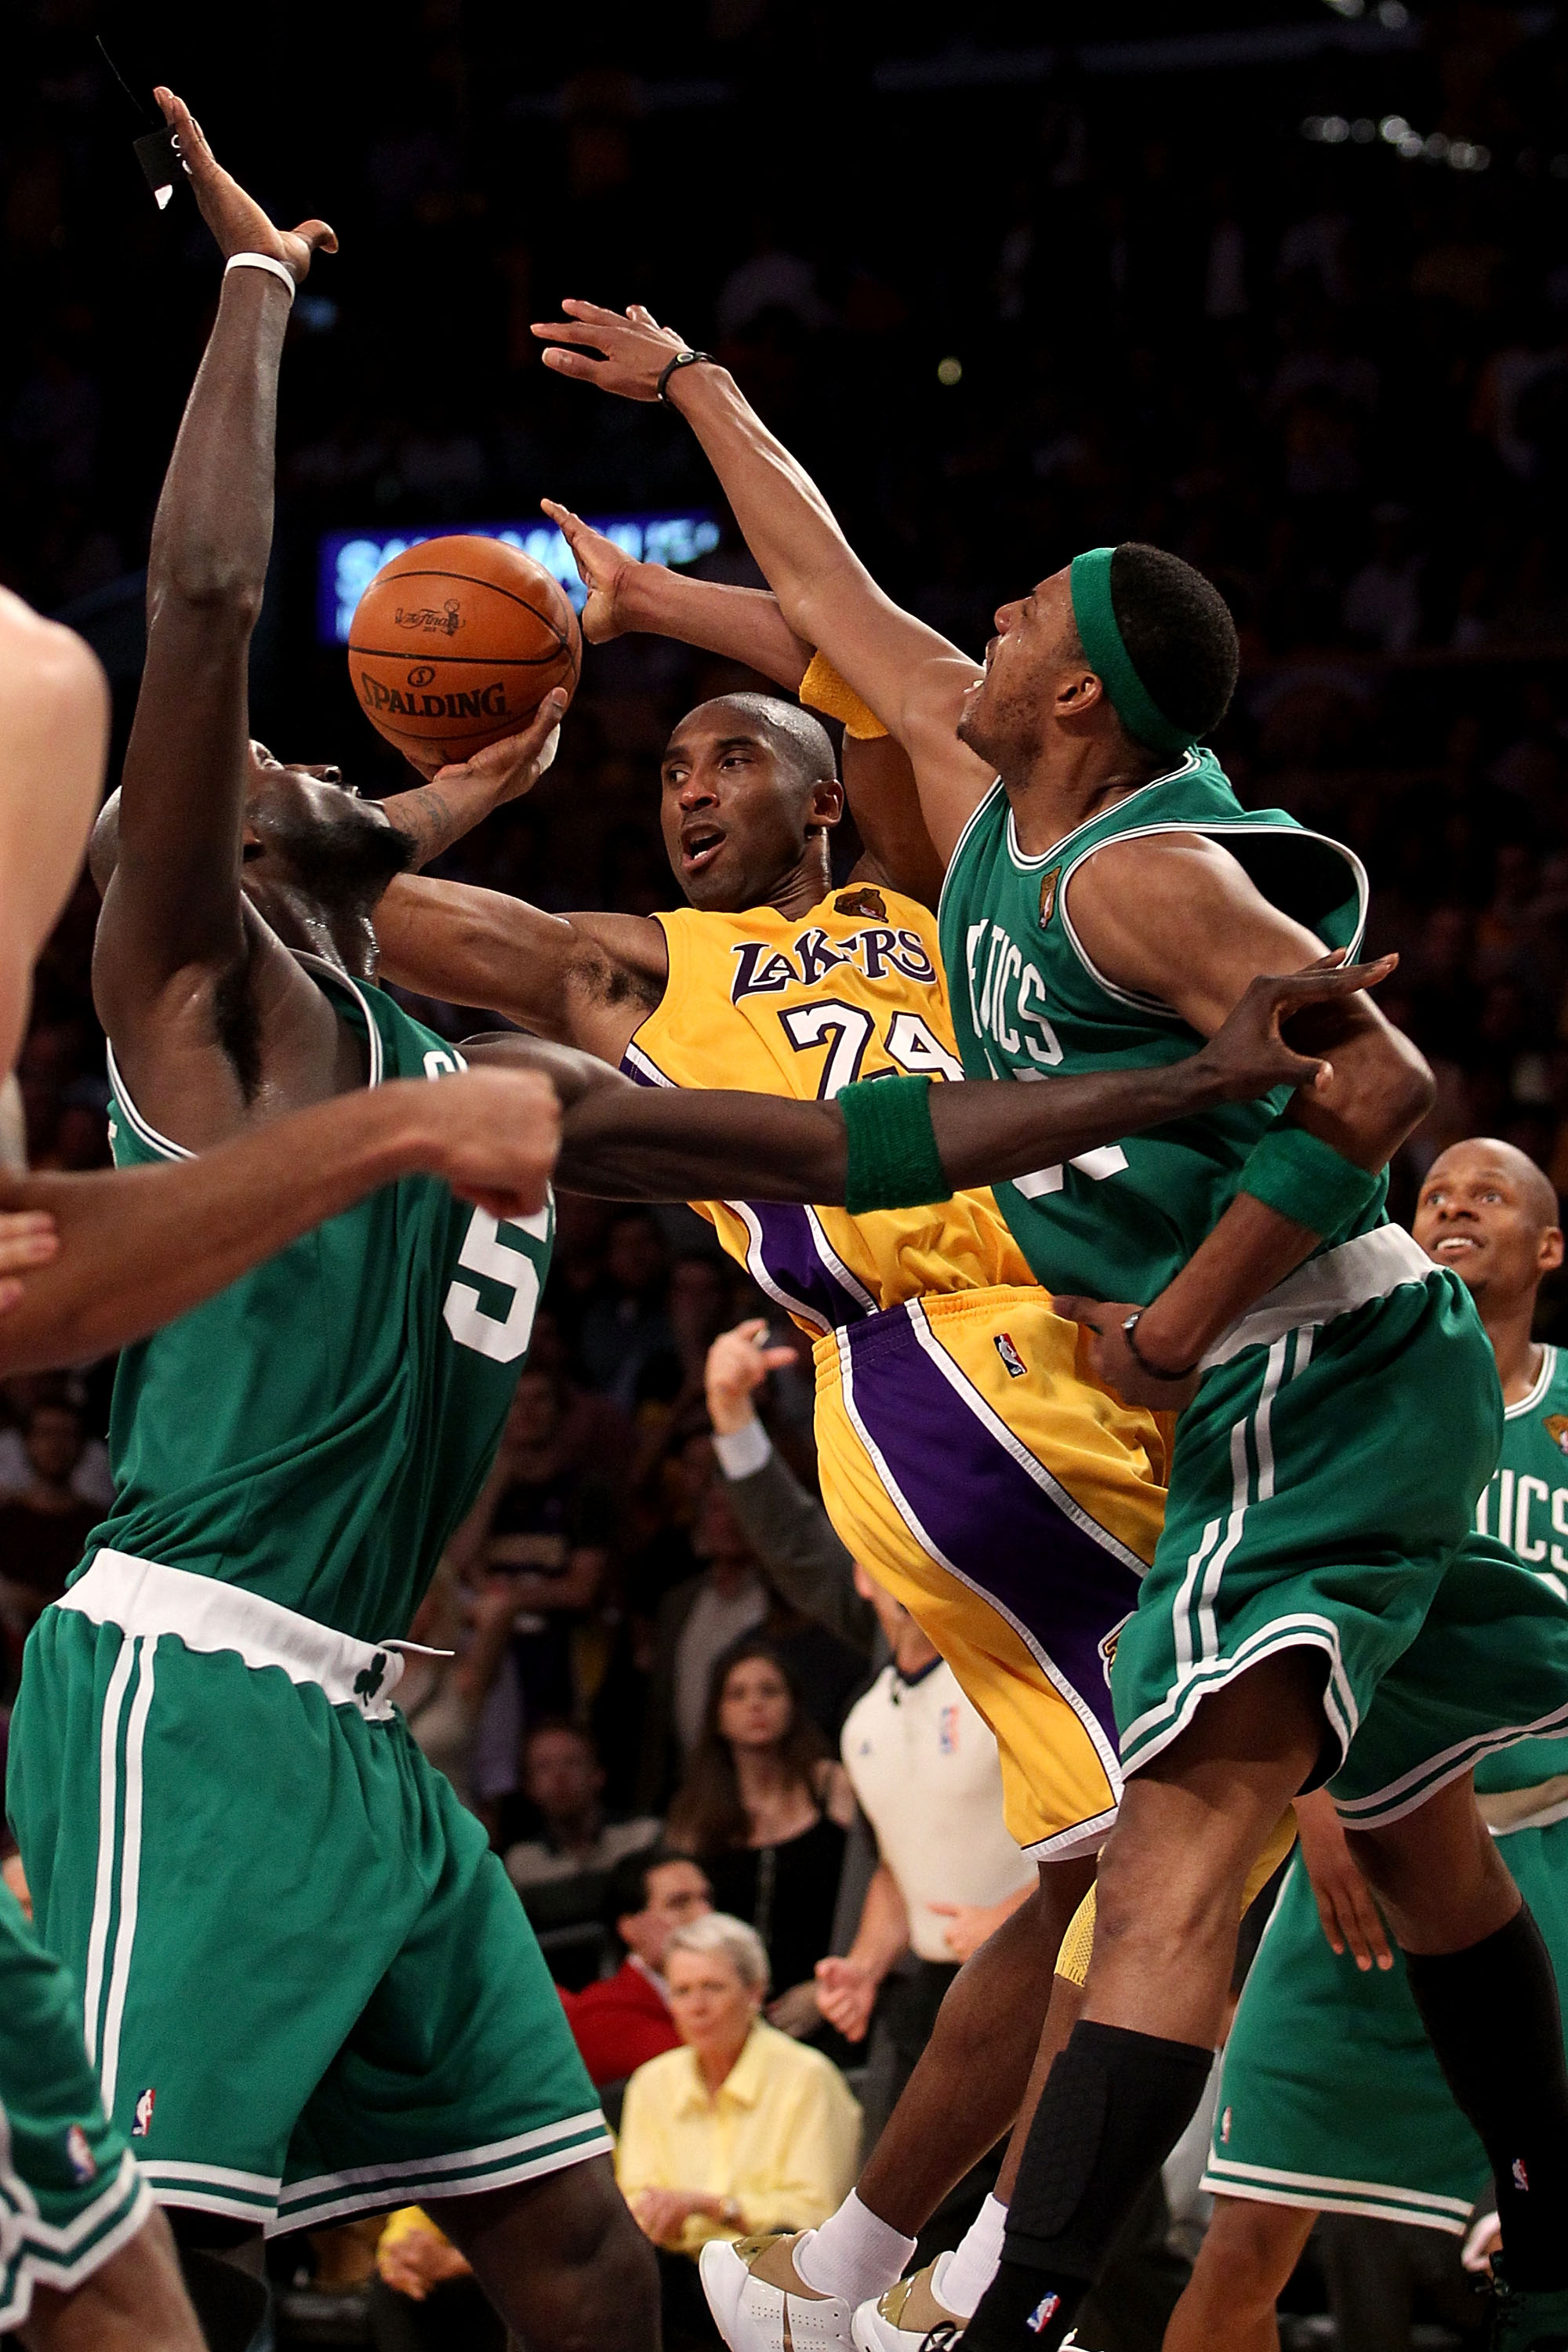 LOS ANGELES, CA - JUNE 17:  Kobe Bryant #24 of the Los Angeles Lakers passes under pressure from Kevin Garnett #5 and Paul Pierce #34 of the Boston Celtics in Game Seven of the 2010 NBA Finals at Staples Center on June 17, 2010 in Los Angeles, California.